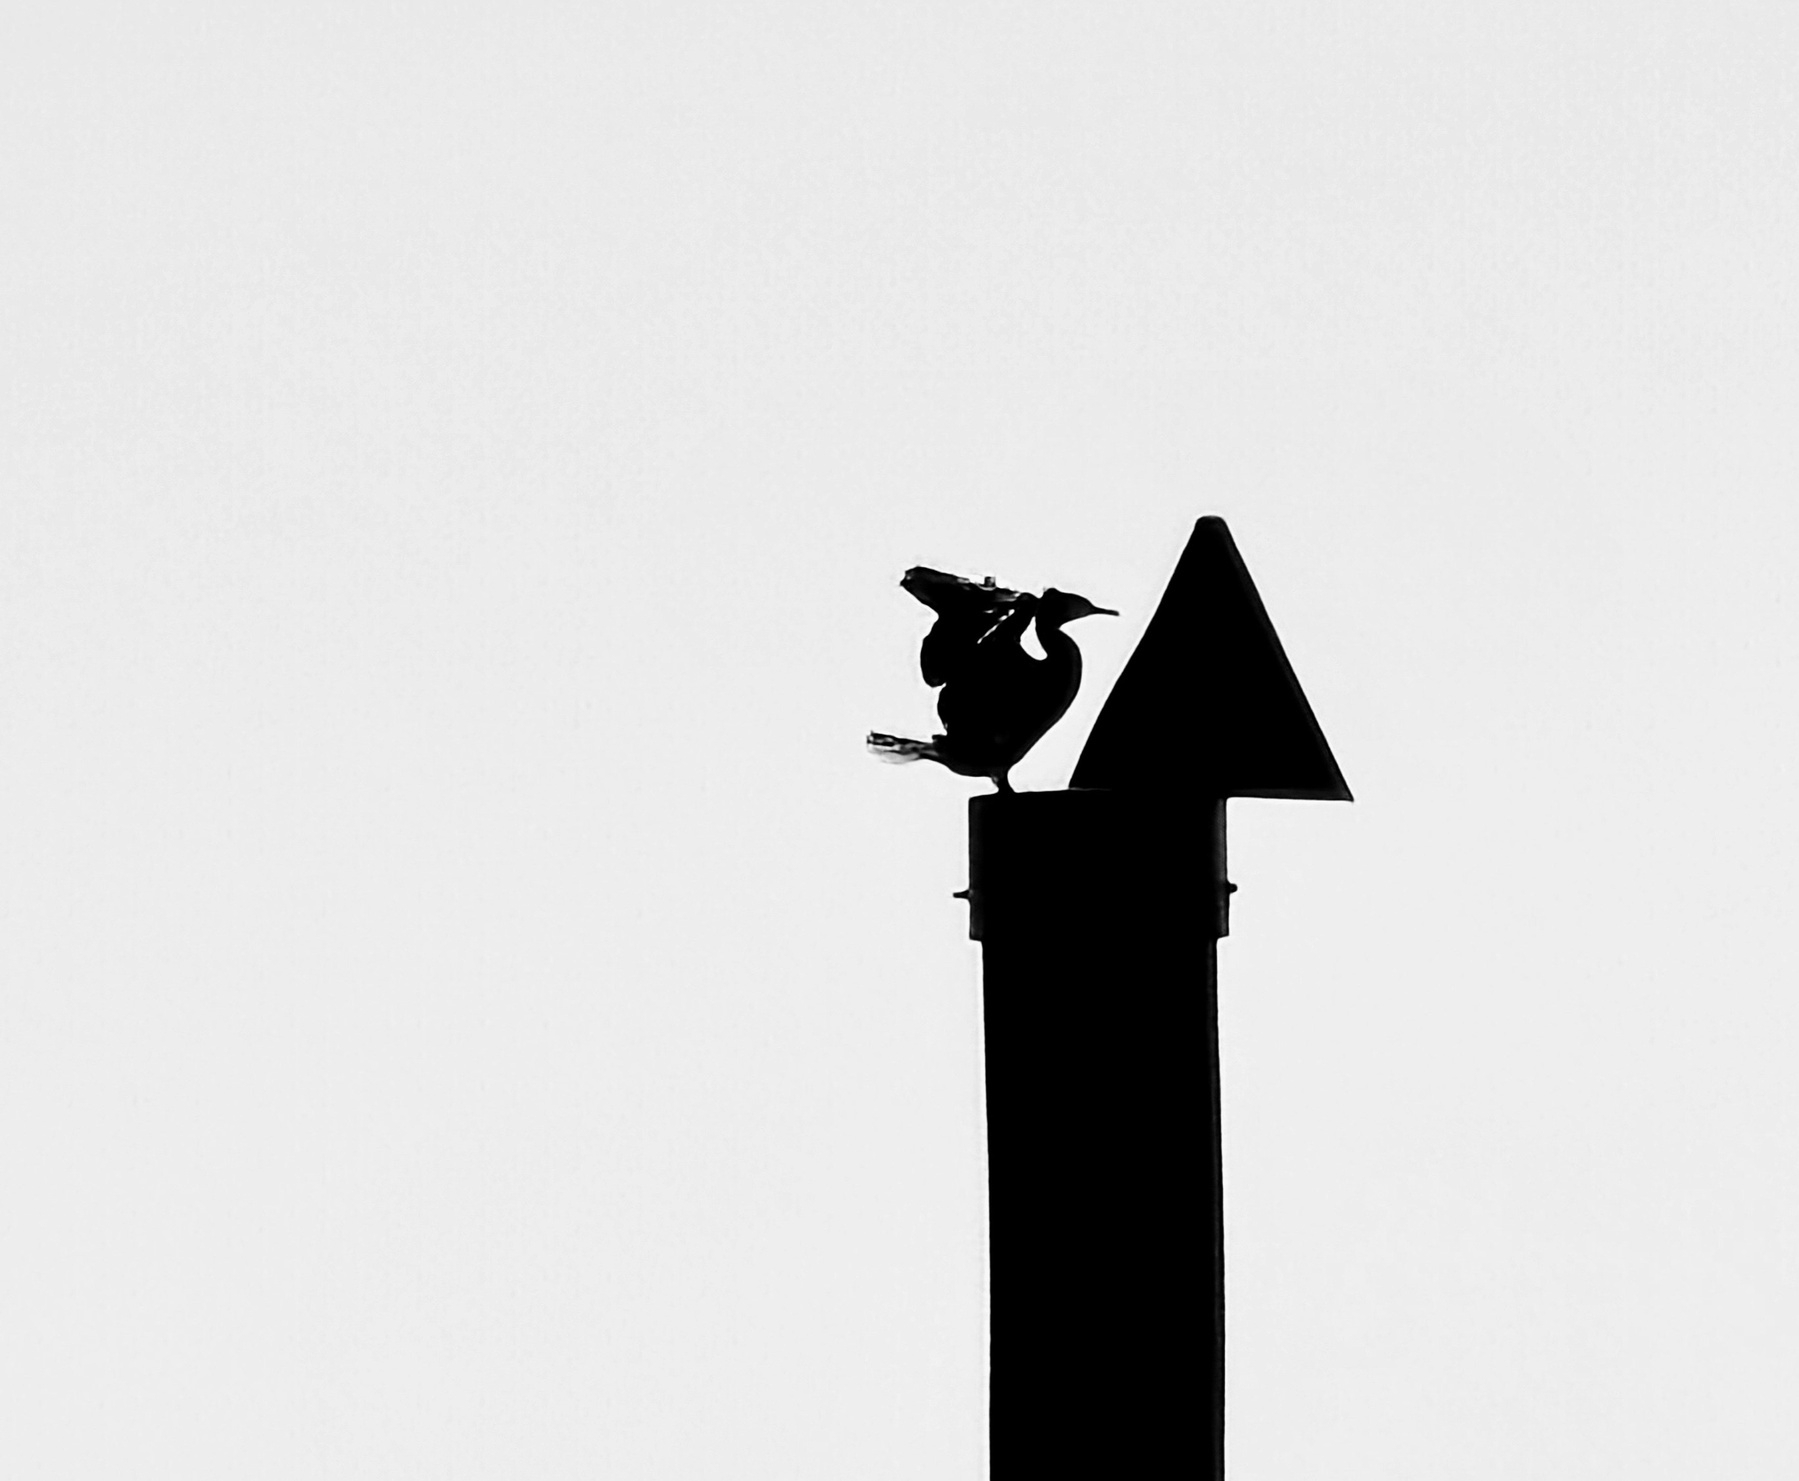 B/w of a seabird, perhaps a shag or a cormorant with its wings outstretched standing on top of a pole